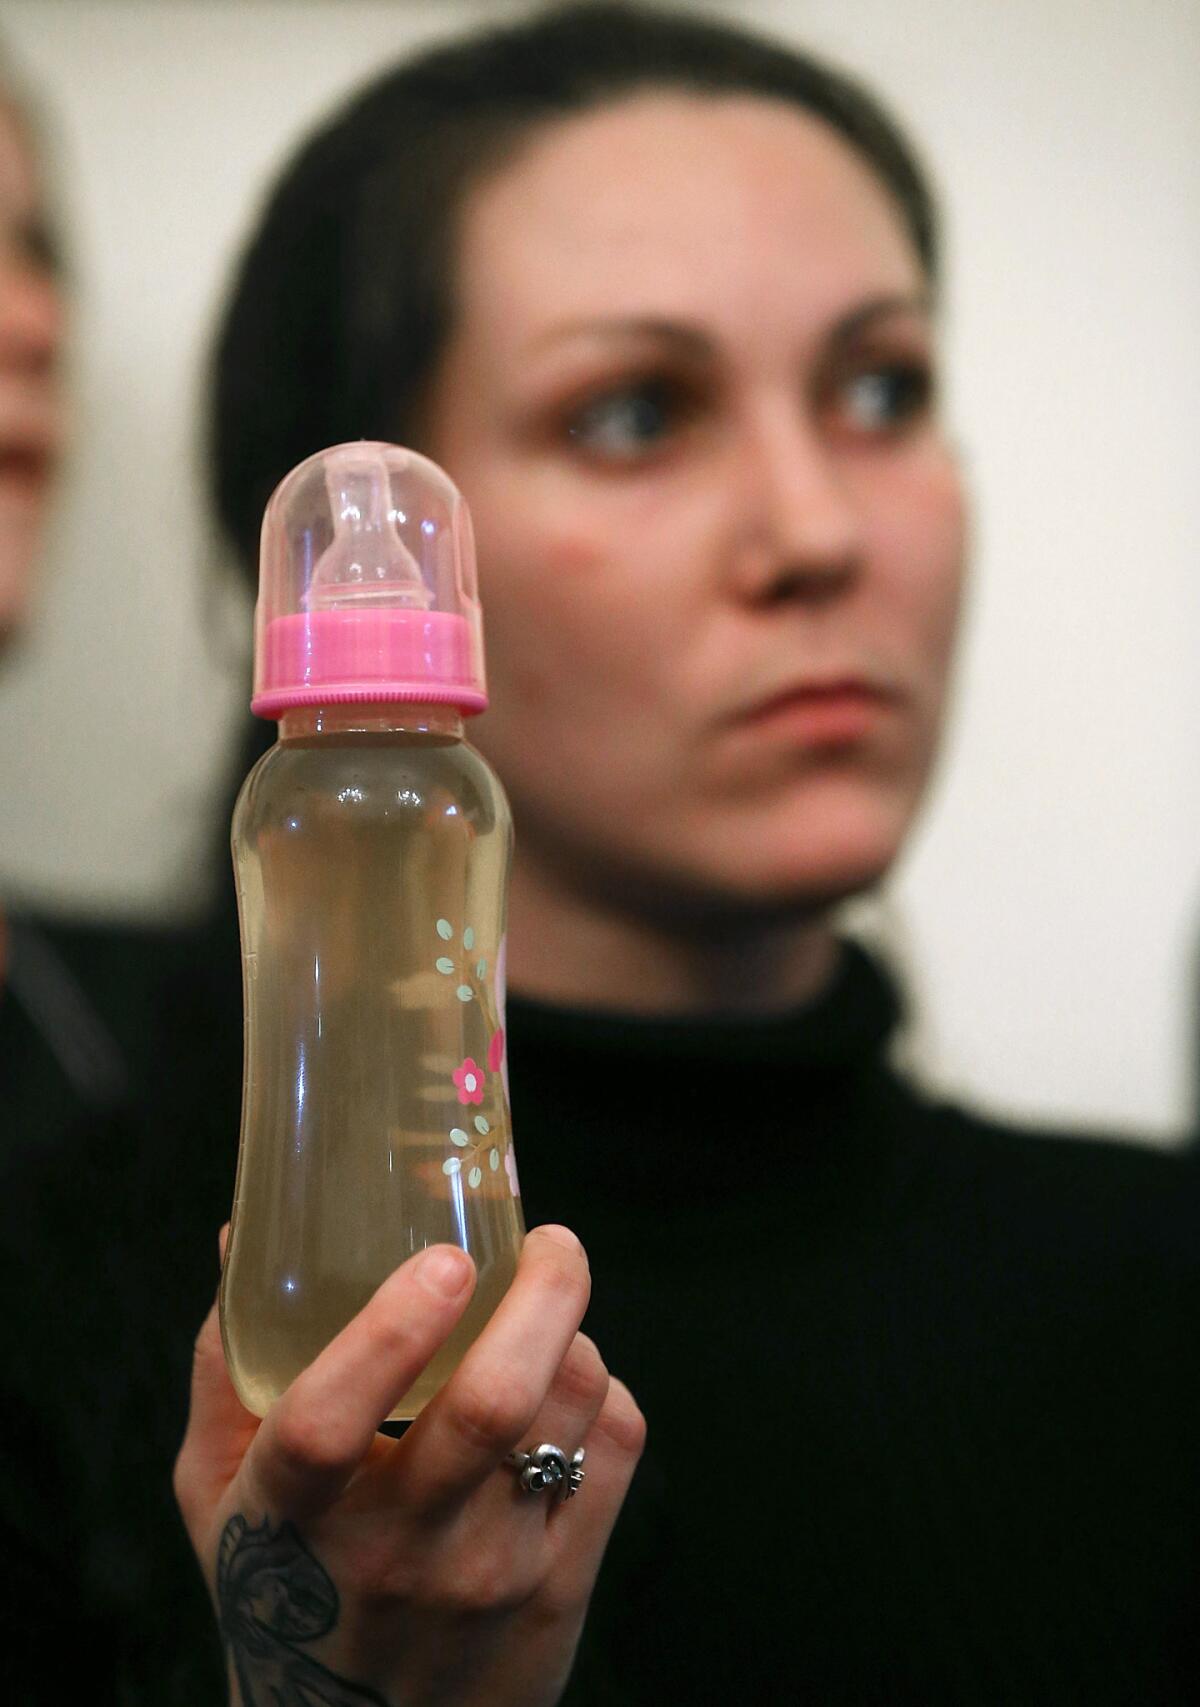 Flint, Mich. resident Jessica Owens holds a baby bottle filled with contamined water during a news conference after attending a House Oversight and Government Reform Committee hearing on Feb. 3, 2016.